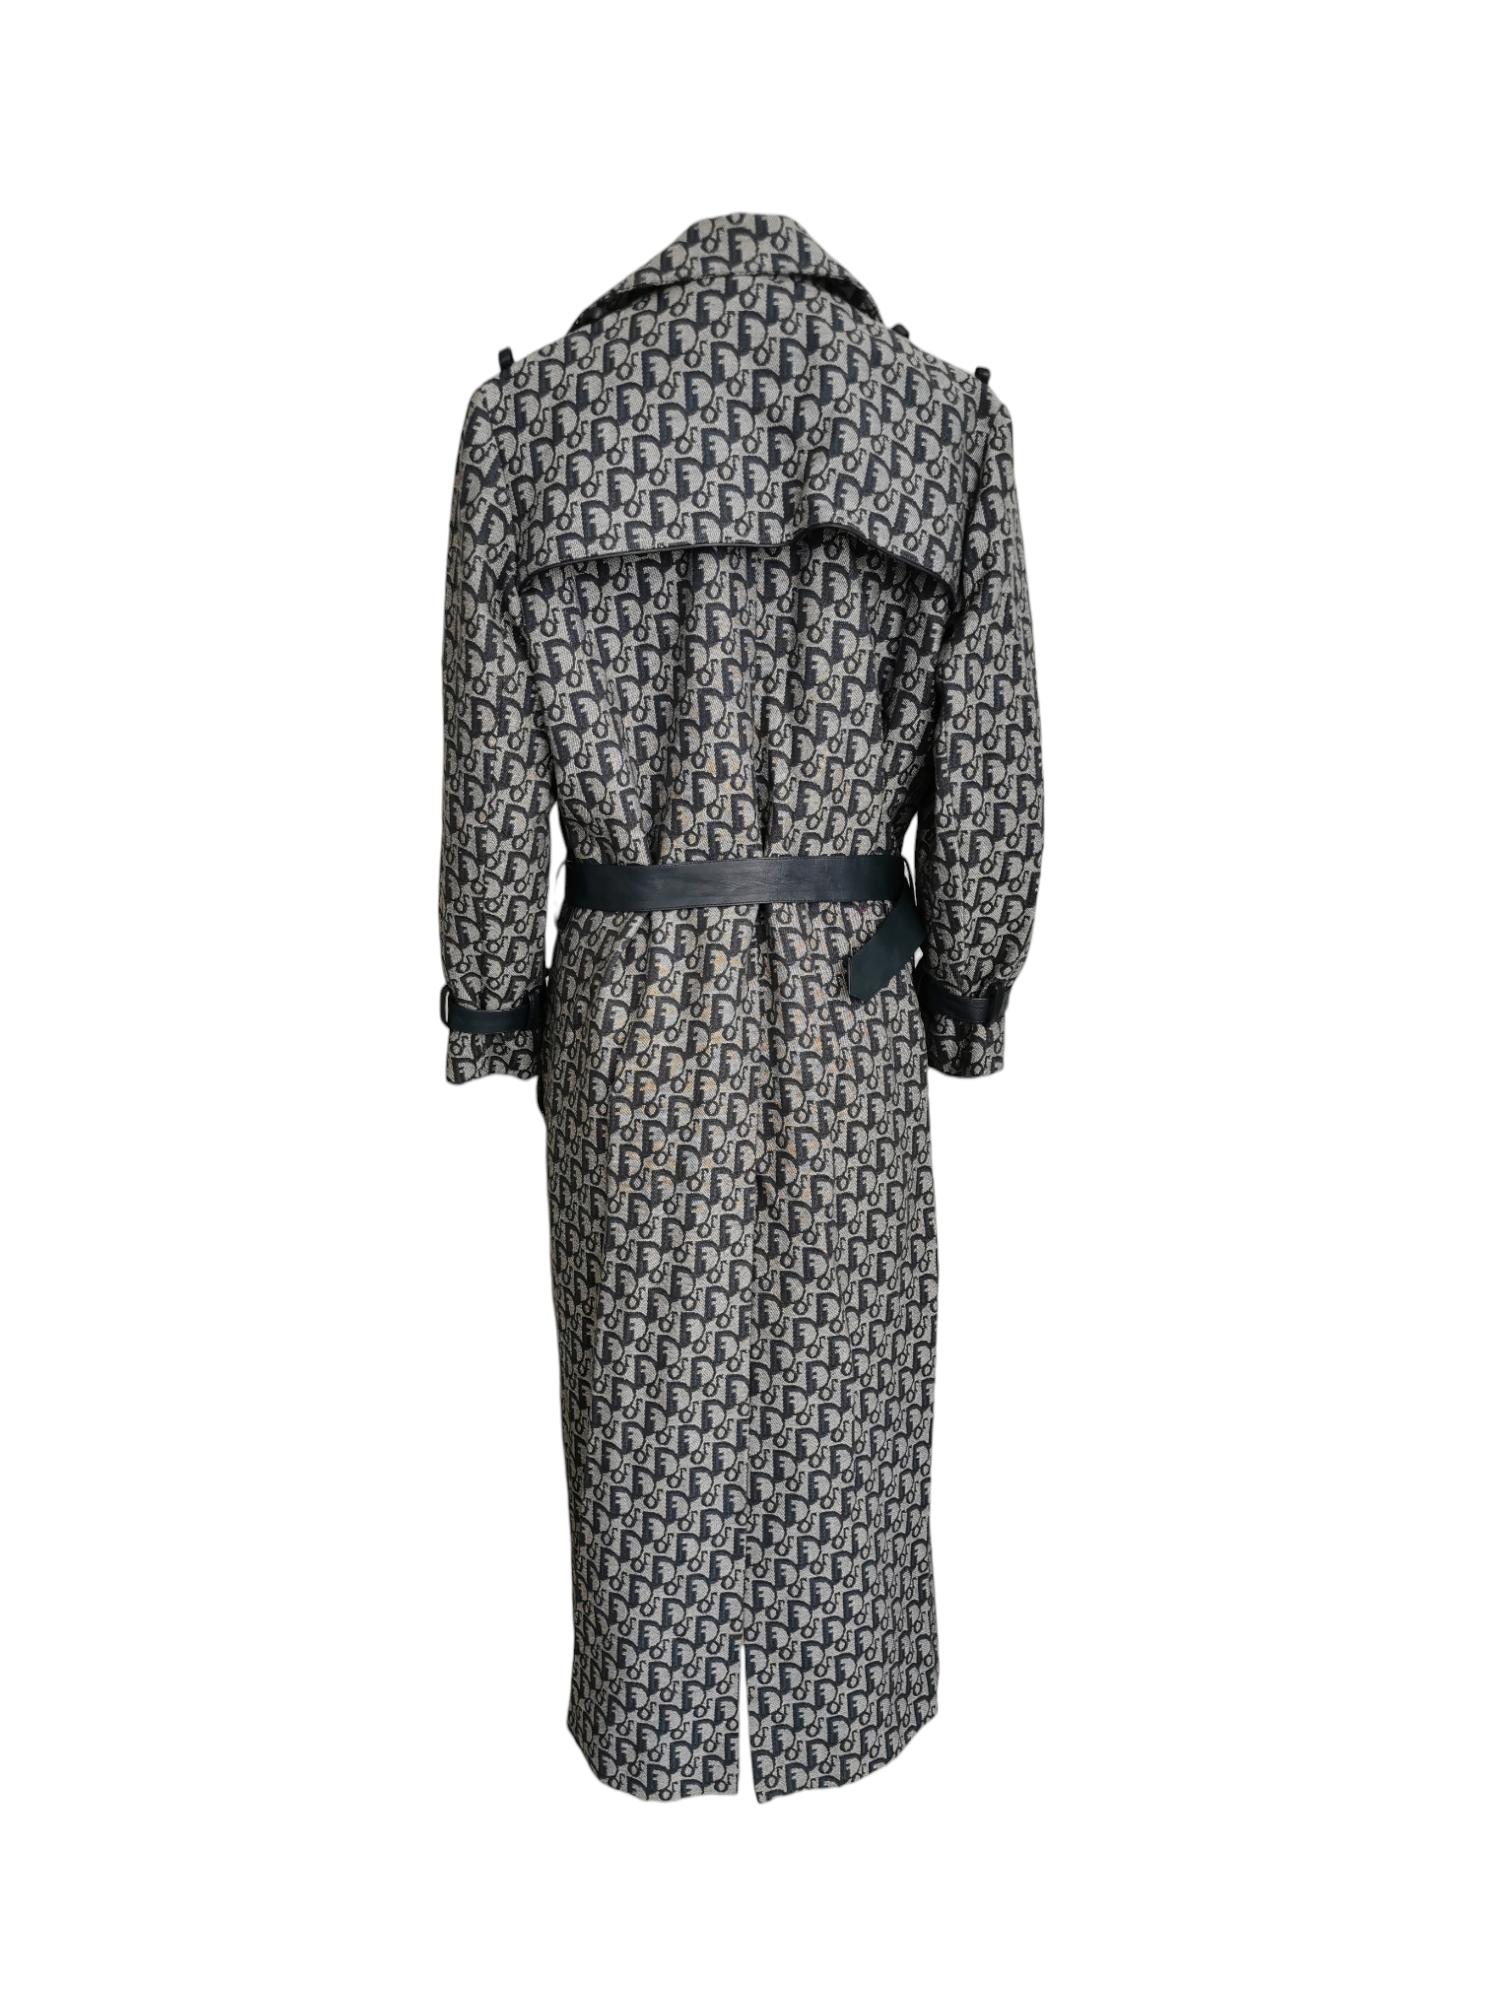 “Welcome to all our Super Fly Girls” (Vogue, 2000). This stunning Dior by John Galliano denim coat has their signature monogram print. The coat features the C D signature buttons and a big leather belt with a D shaped closure. This vintage piece